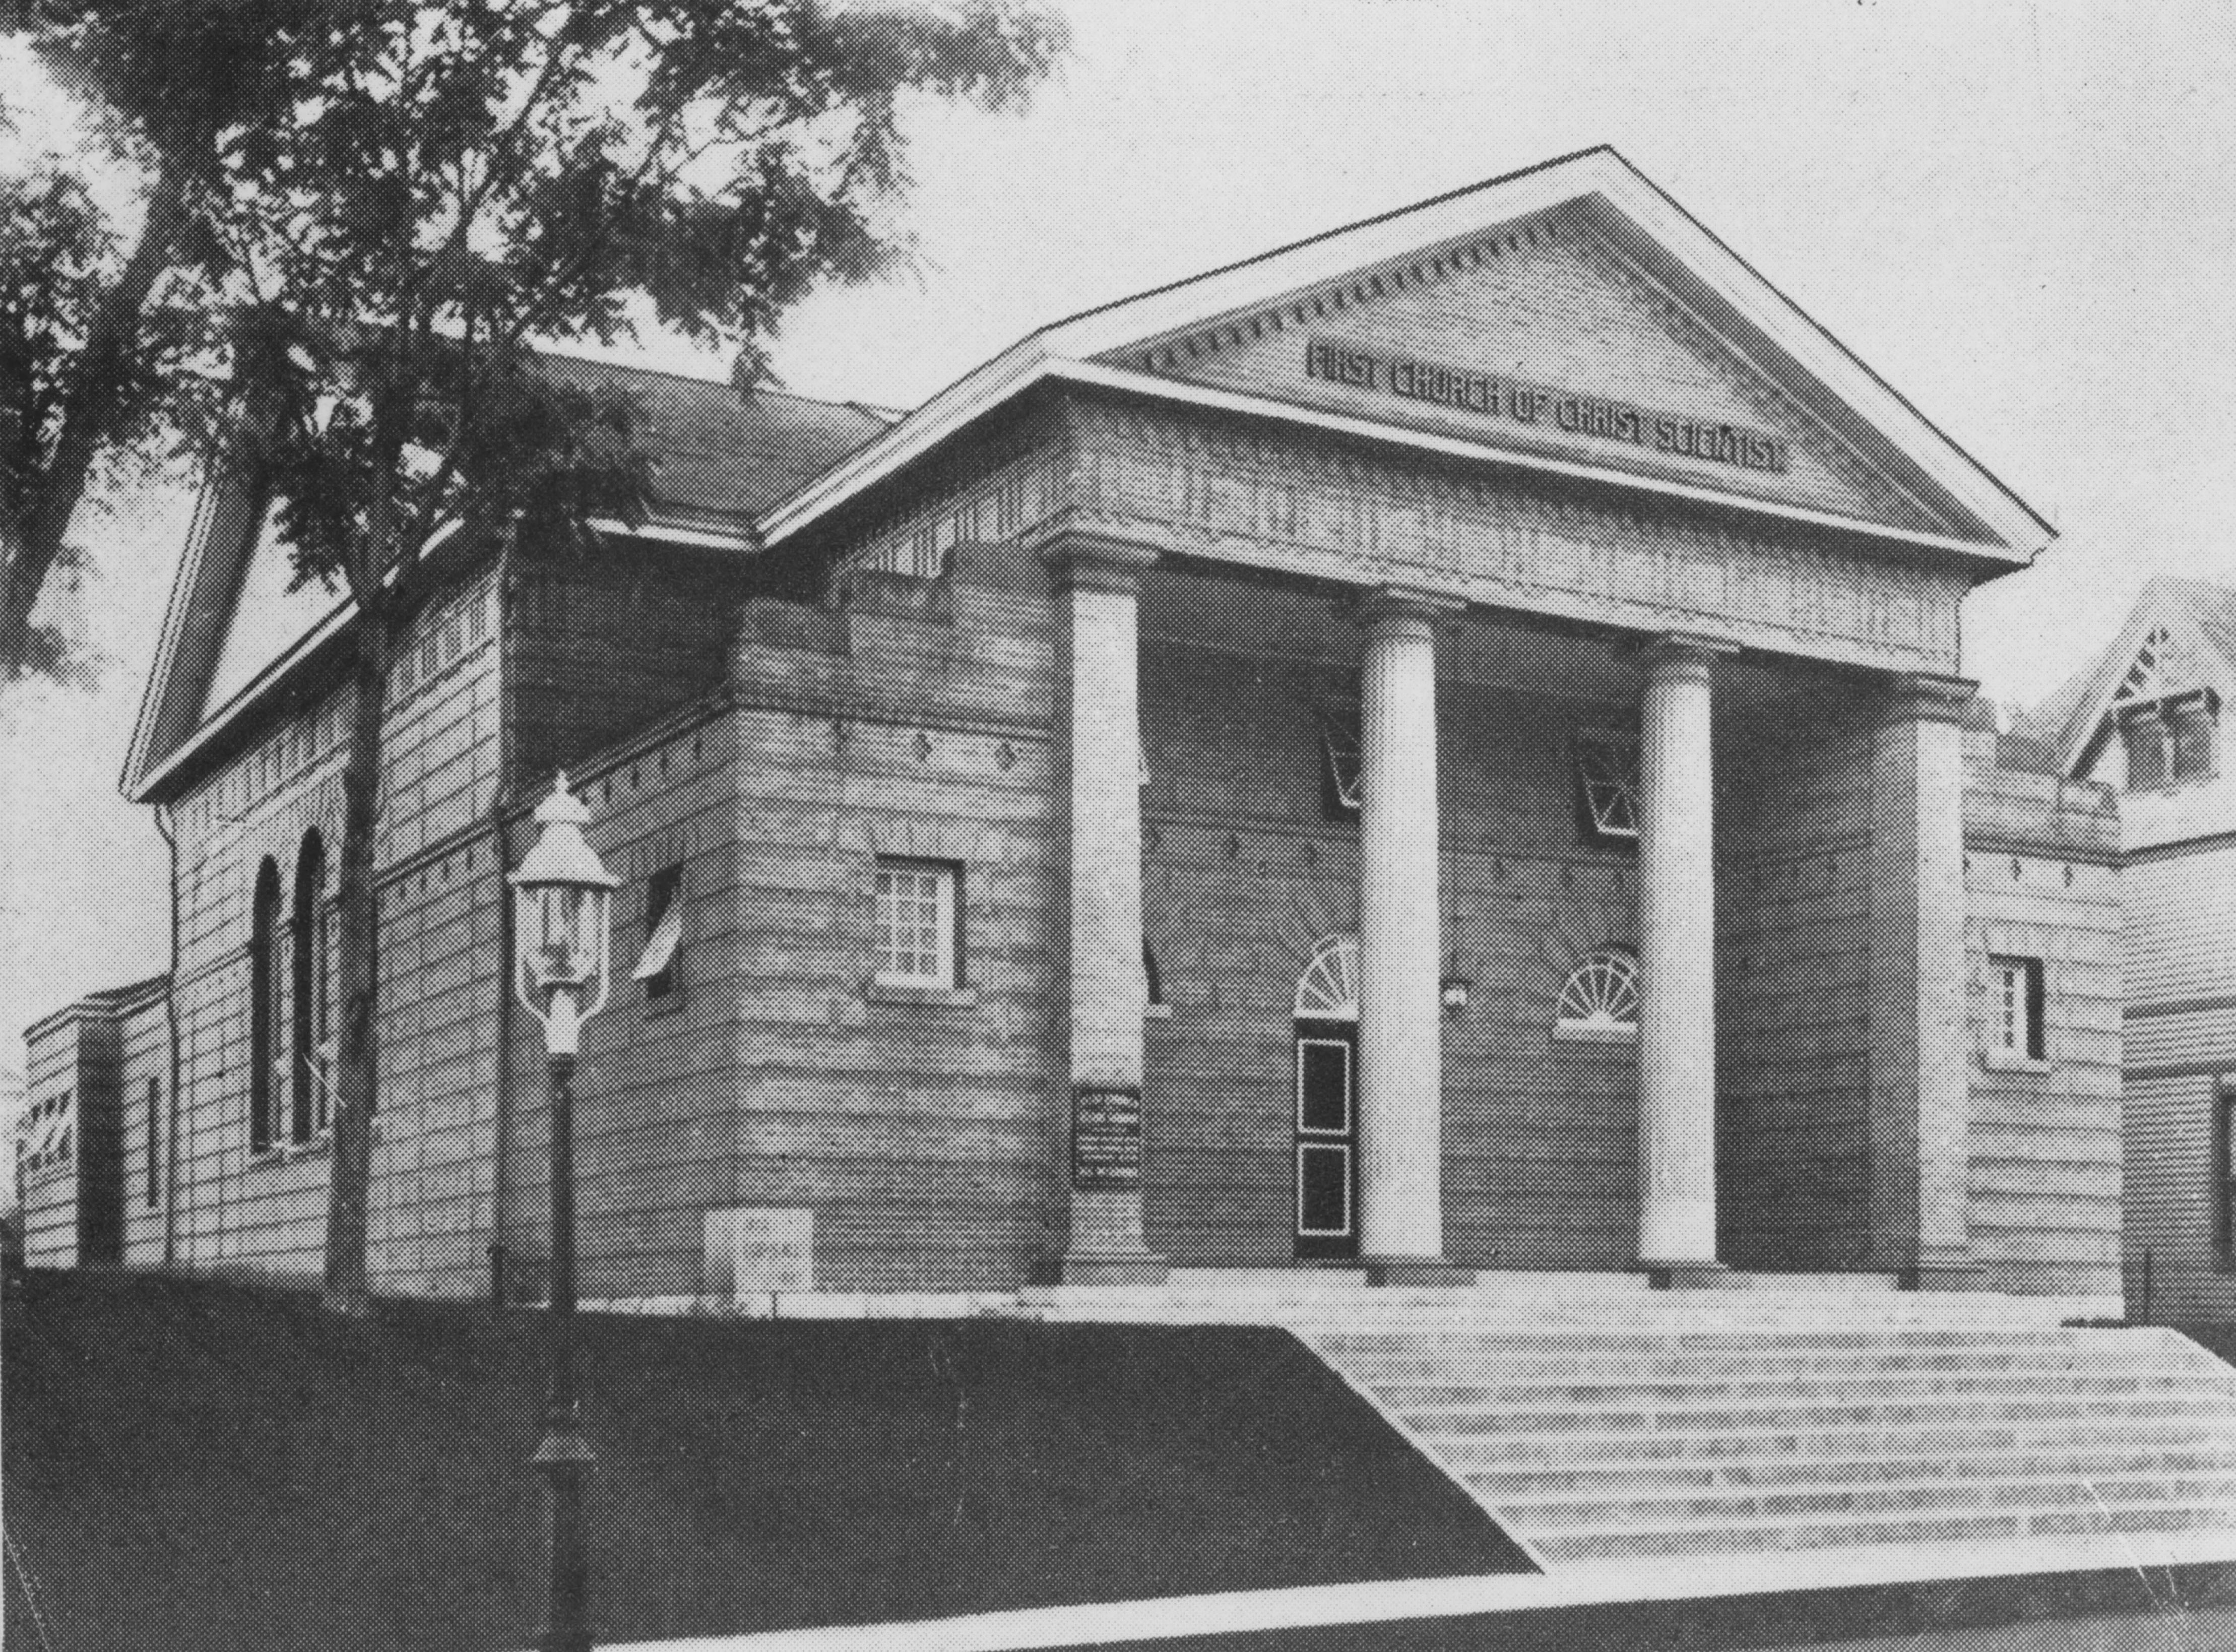 The First Church of Christ, Scientist in 1907.